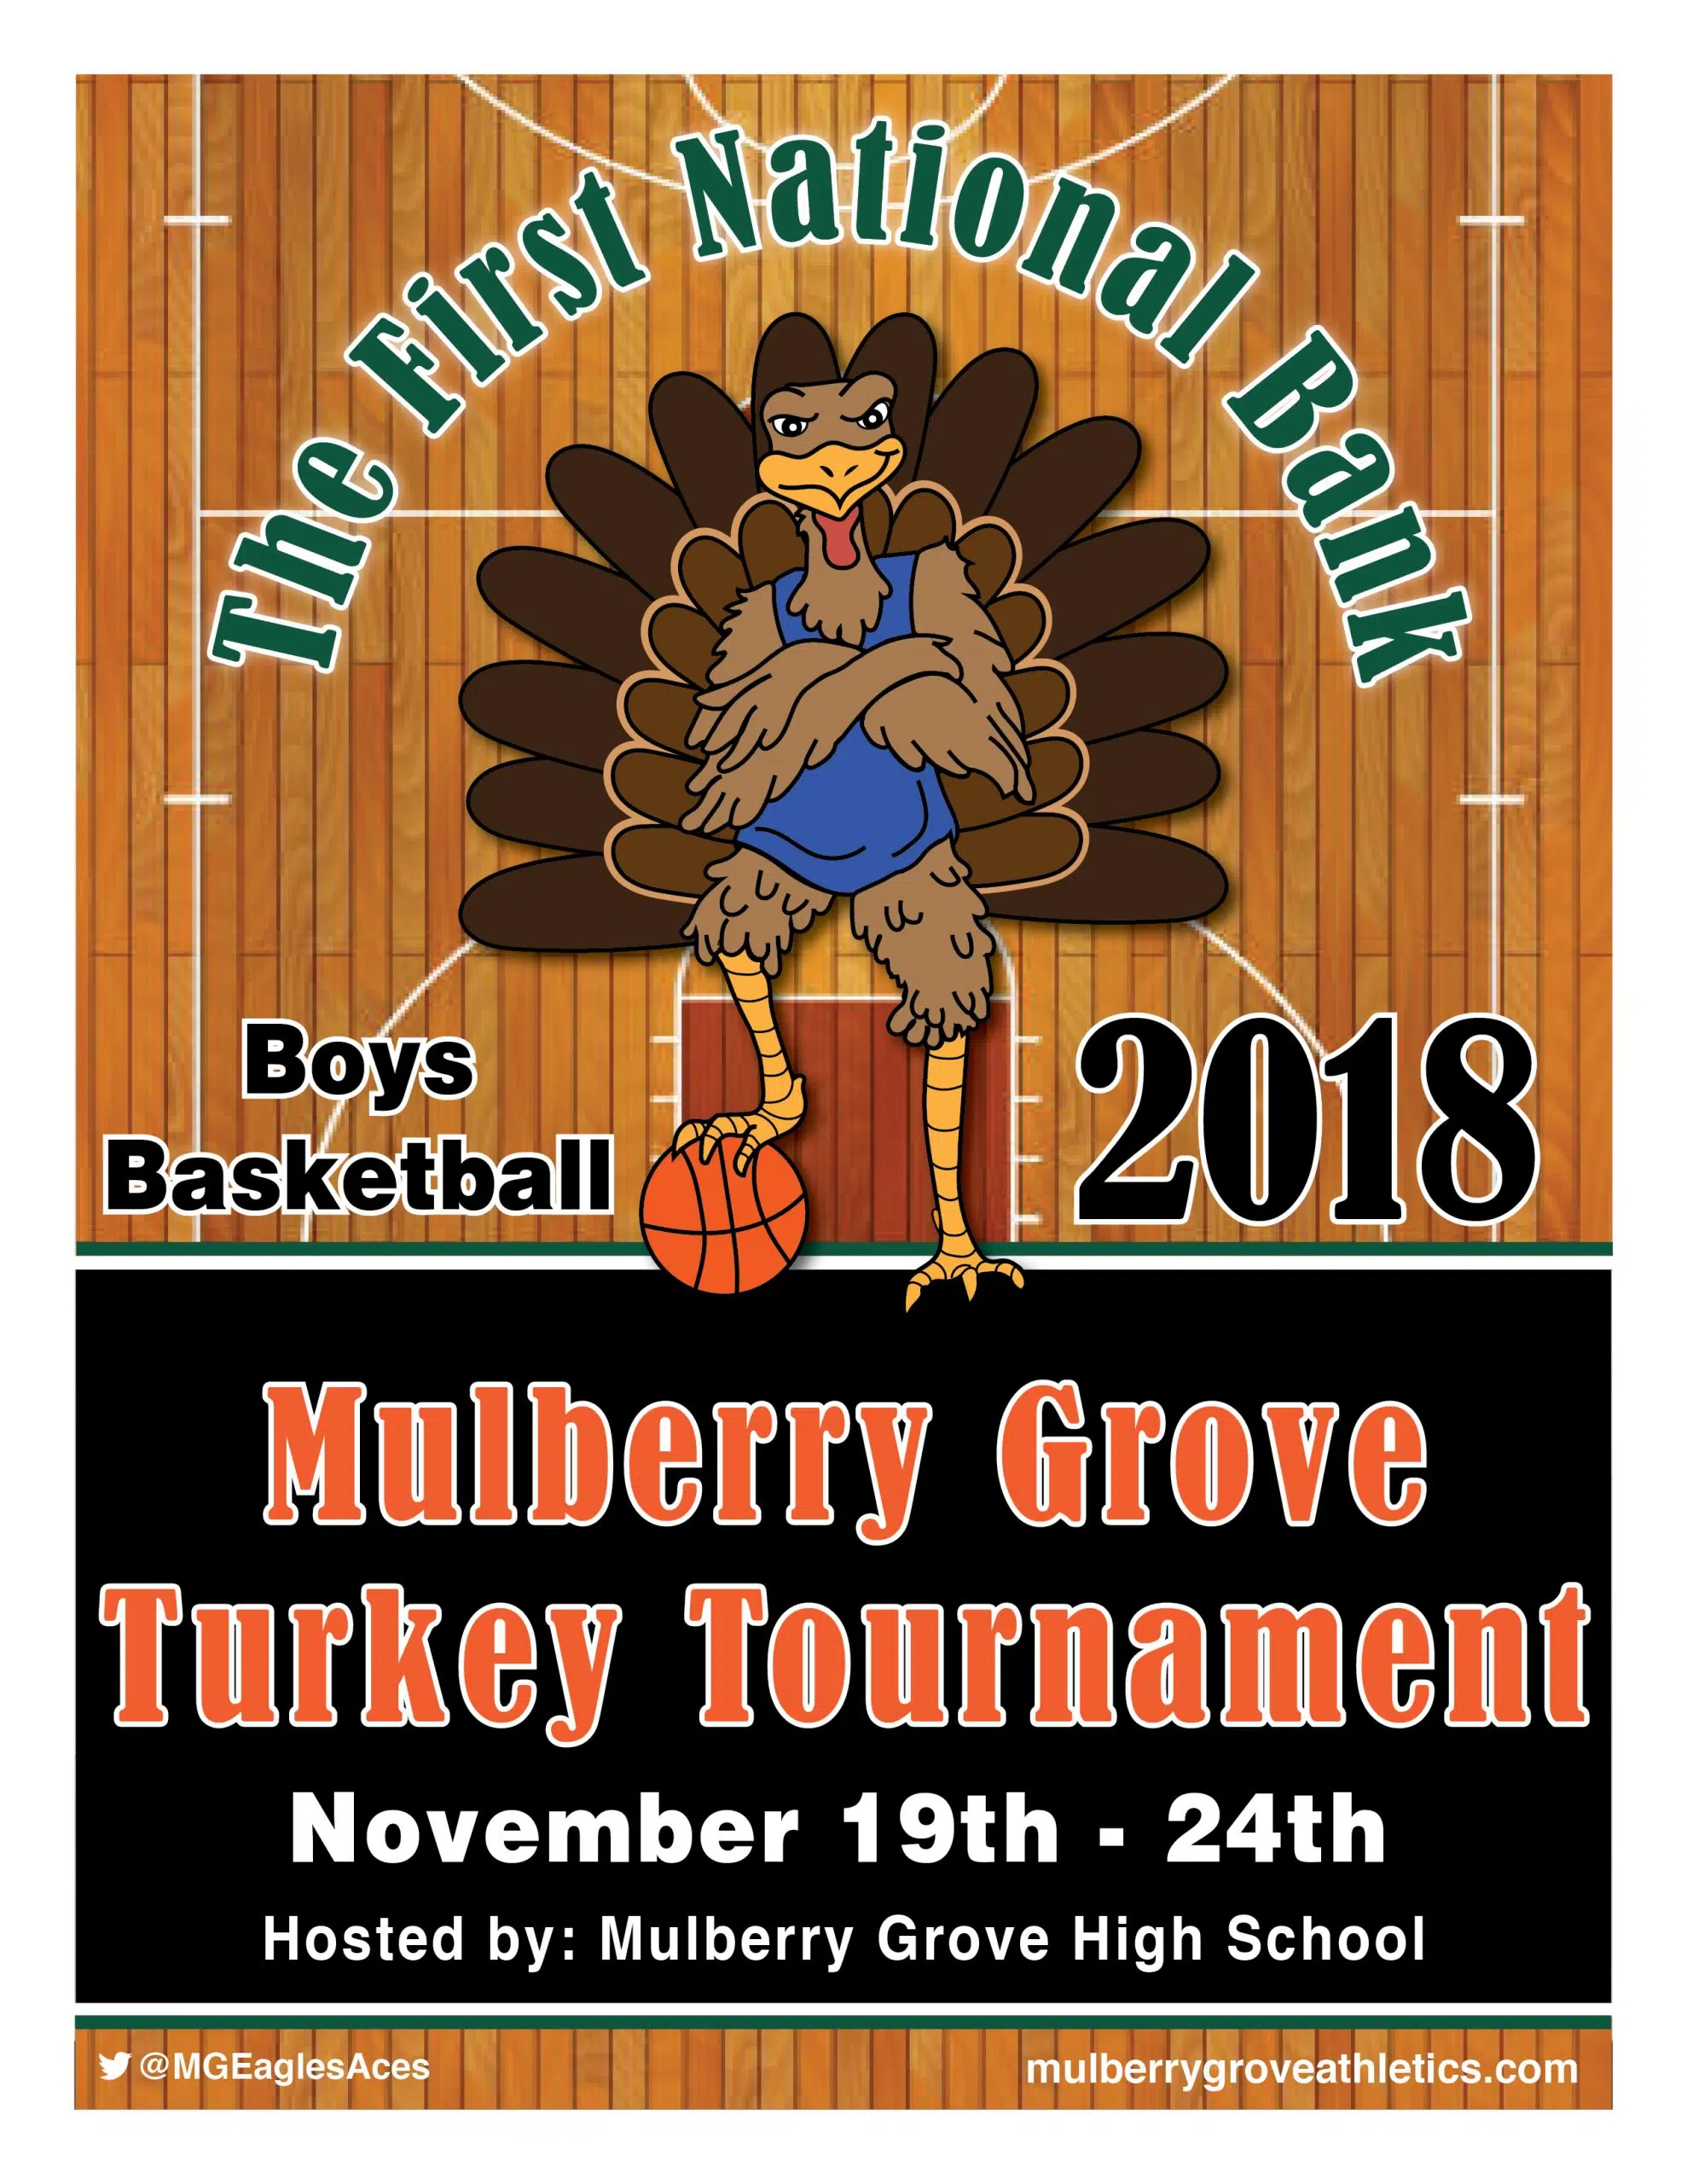 Final Night of Pool Play tonight from the FNB-Mulberry Grove Thanksgiving Tournament 